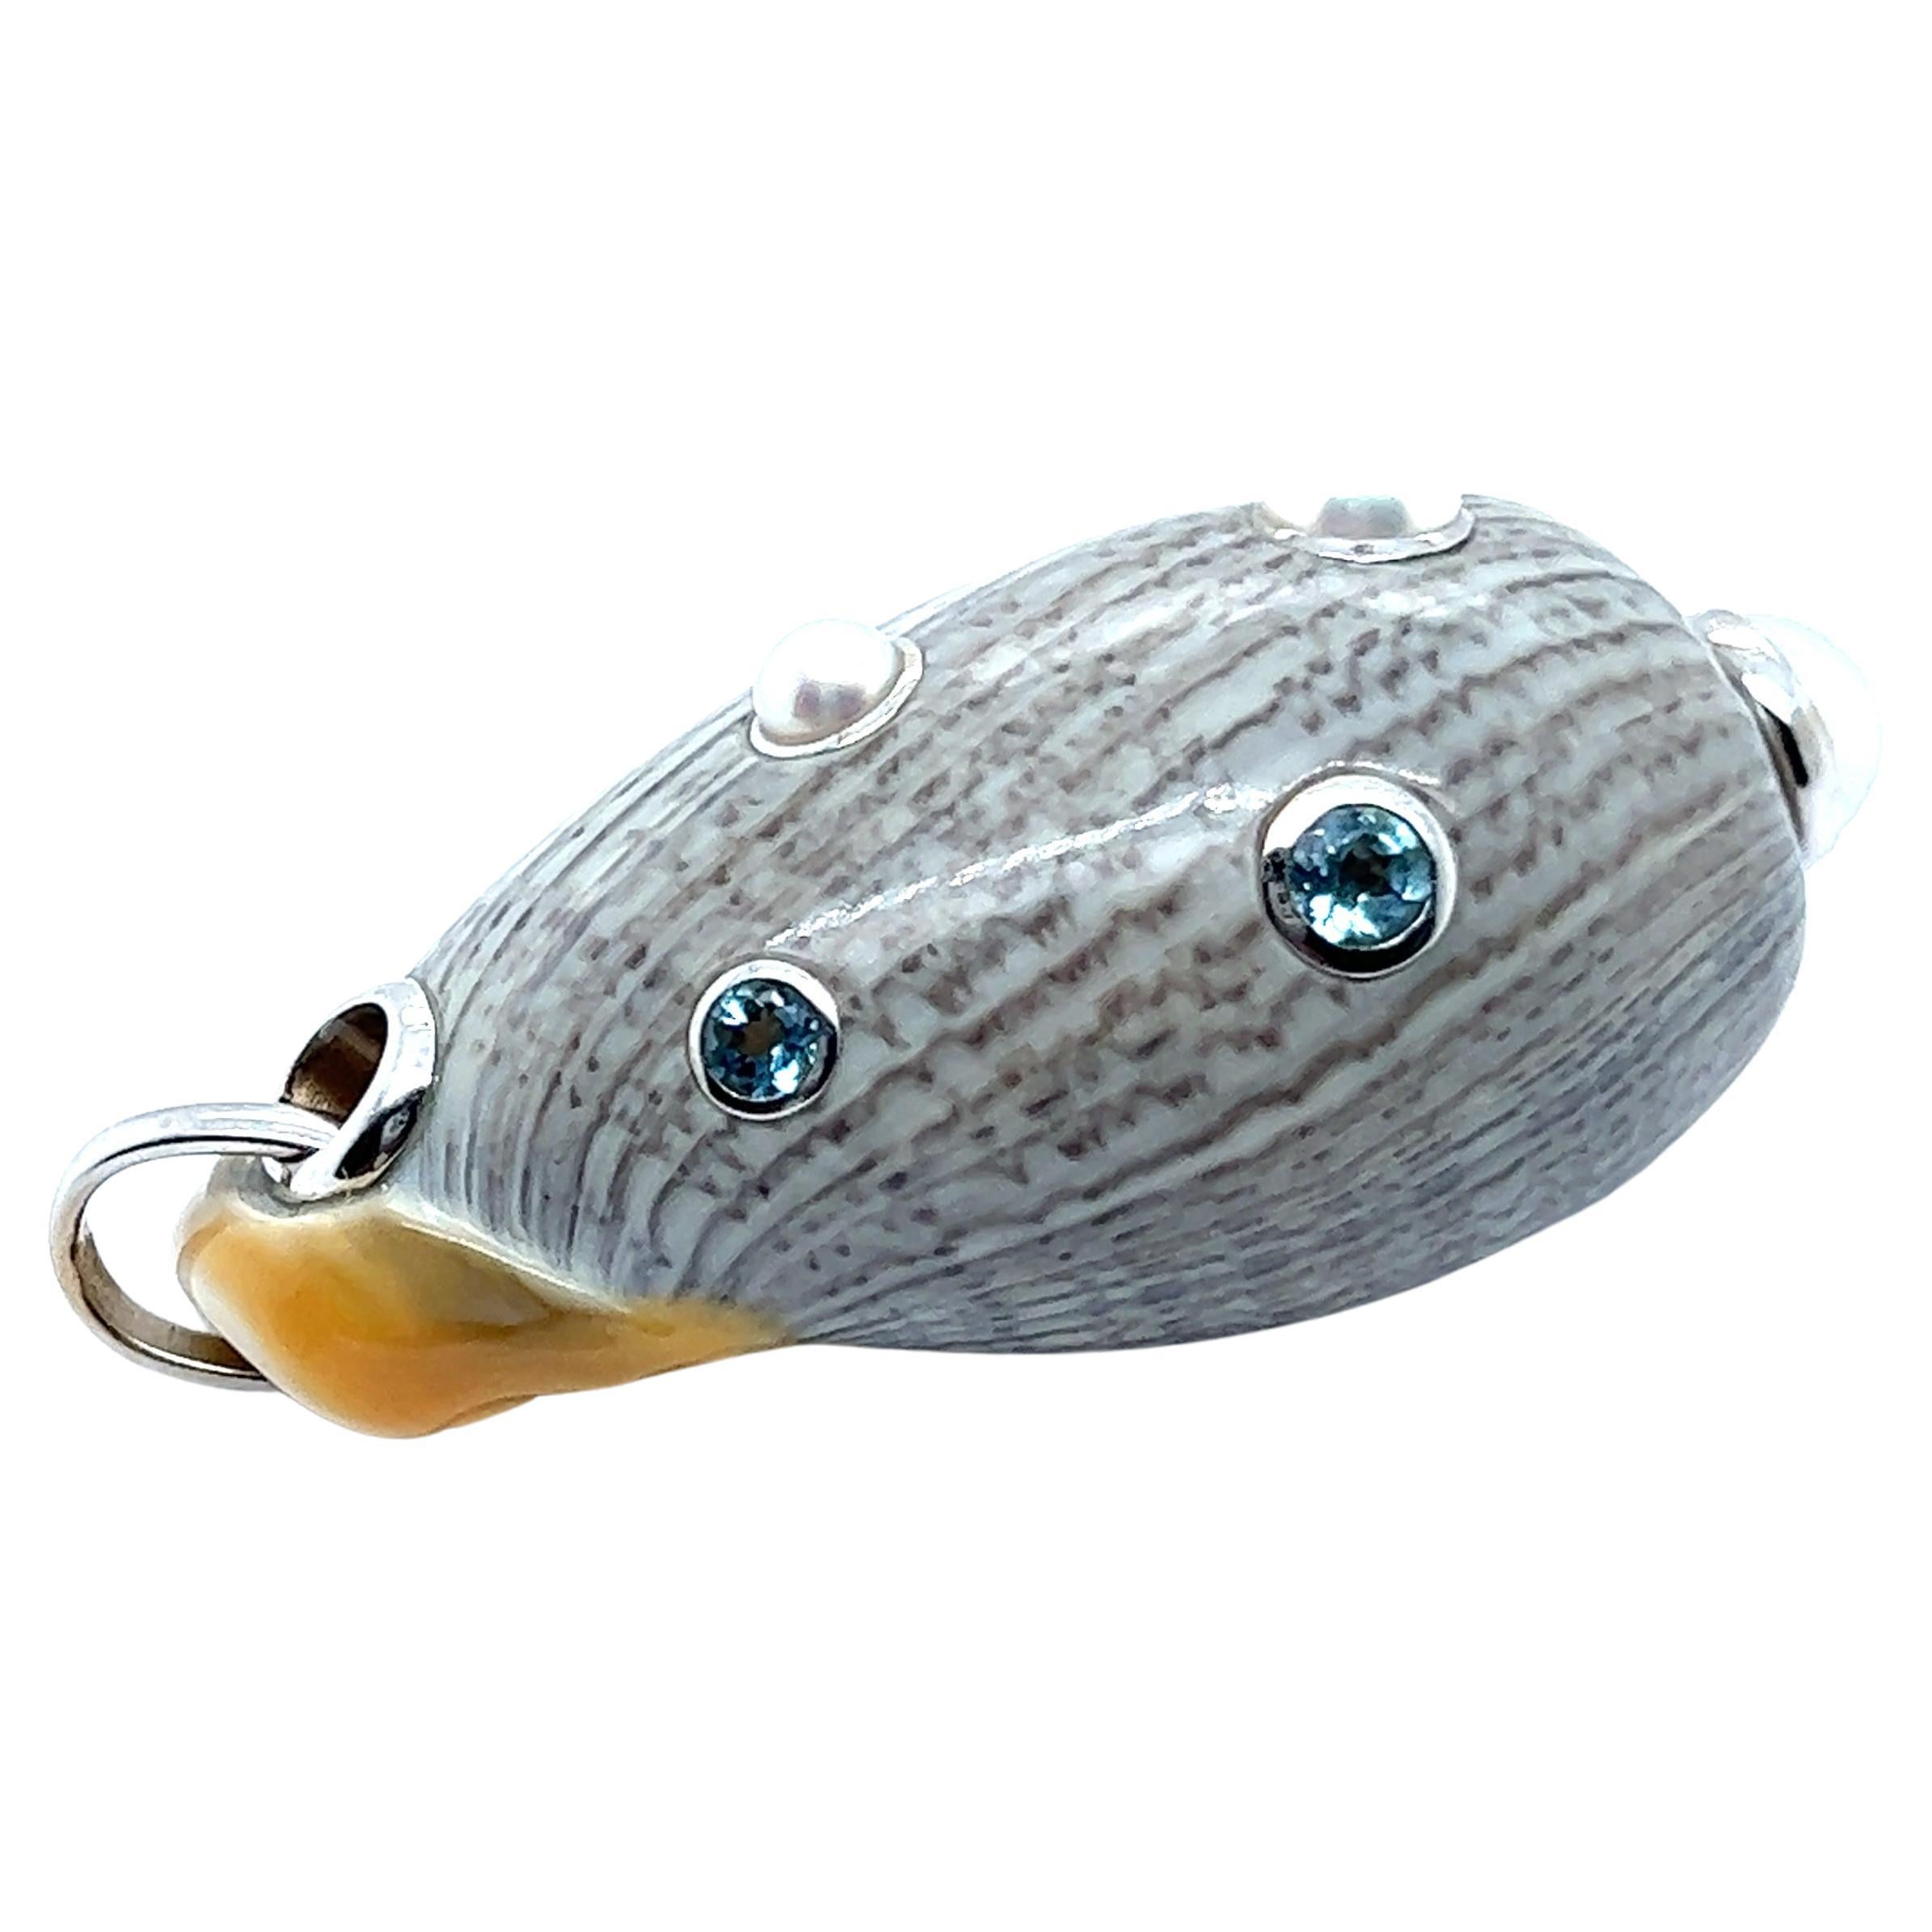 Playful pendant, stunning piece of jewelry created by the legendary designer Seaman Schepps. Created with captivating seashell in a beautiful shade of grey and 18 Karat white gold, pendant is skillfully inlaid with four exquisite aquamarines and